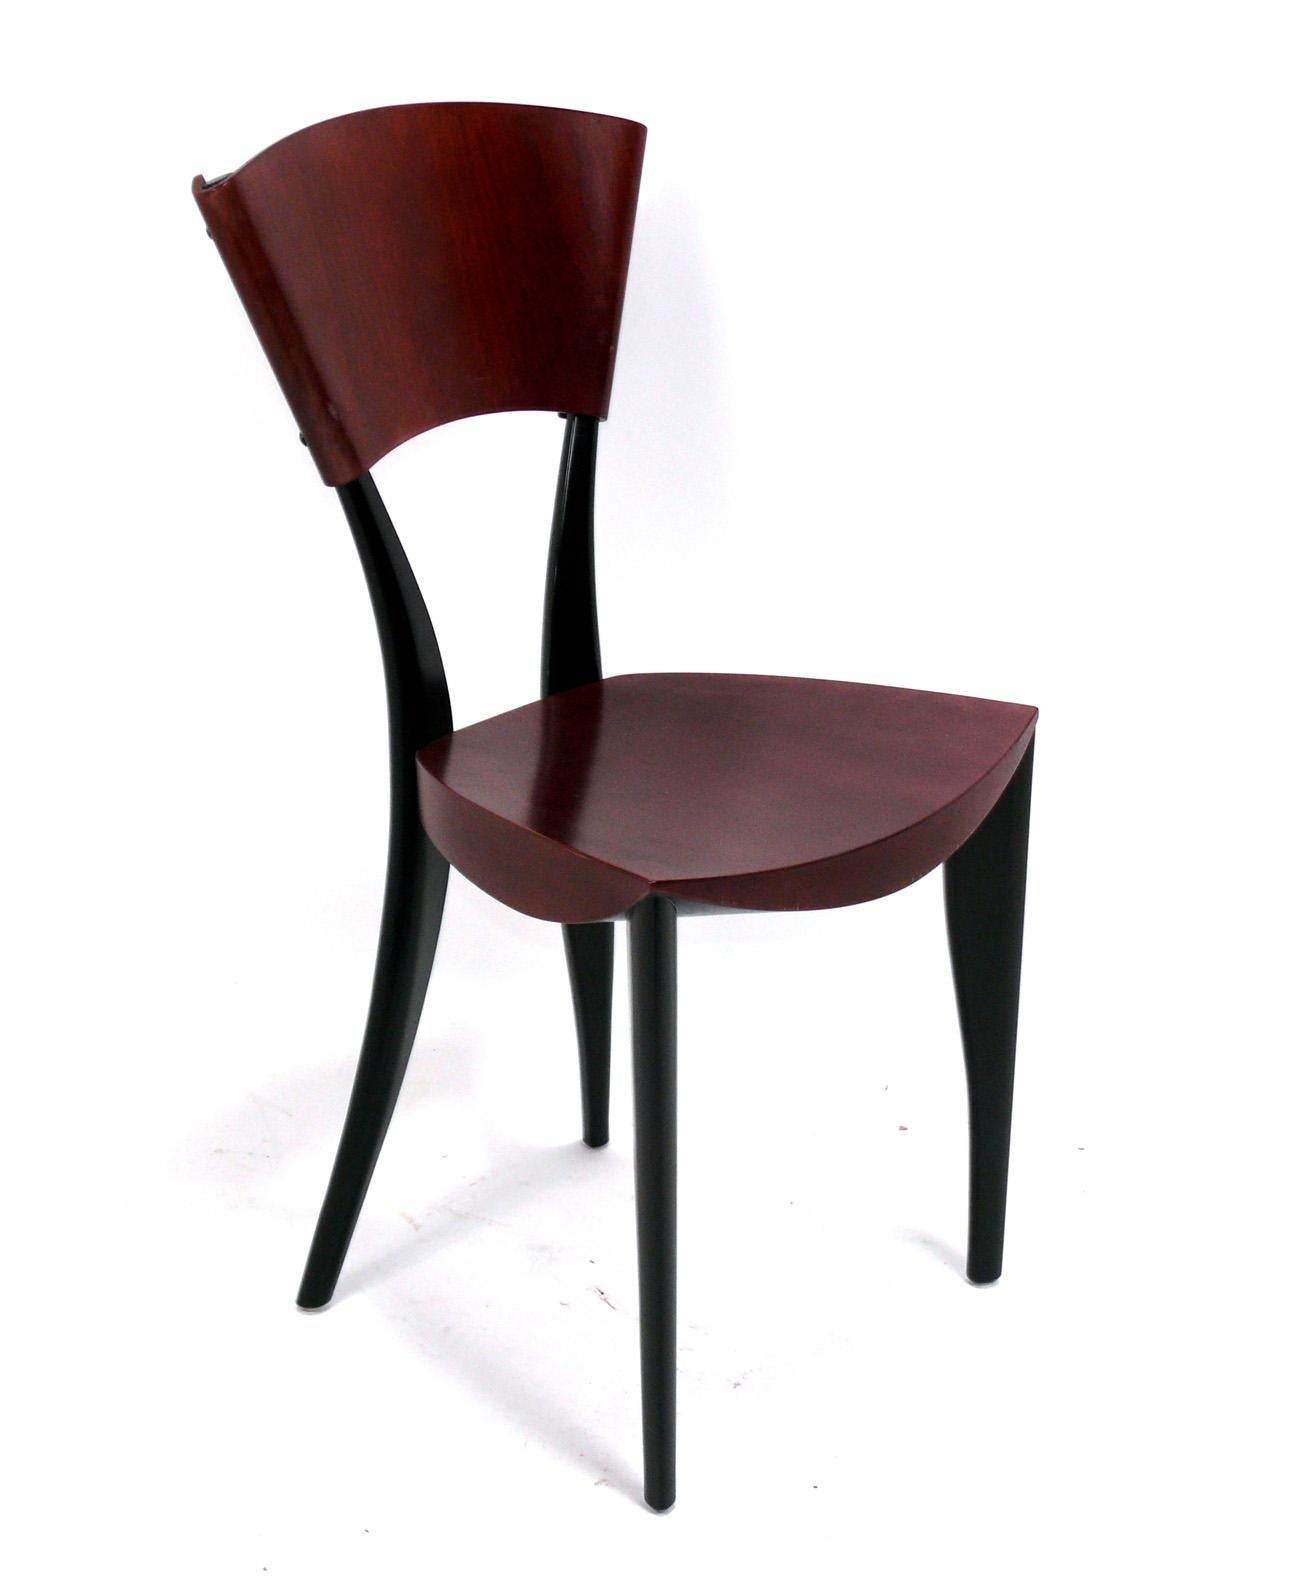 Set of Eight Sculptural Italian dining chairs, designed by Joseph Mancini and Gaby Fois Dorell for Sawaya Moroni, Italy, circa 2000s.